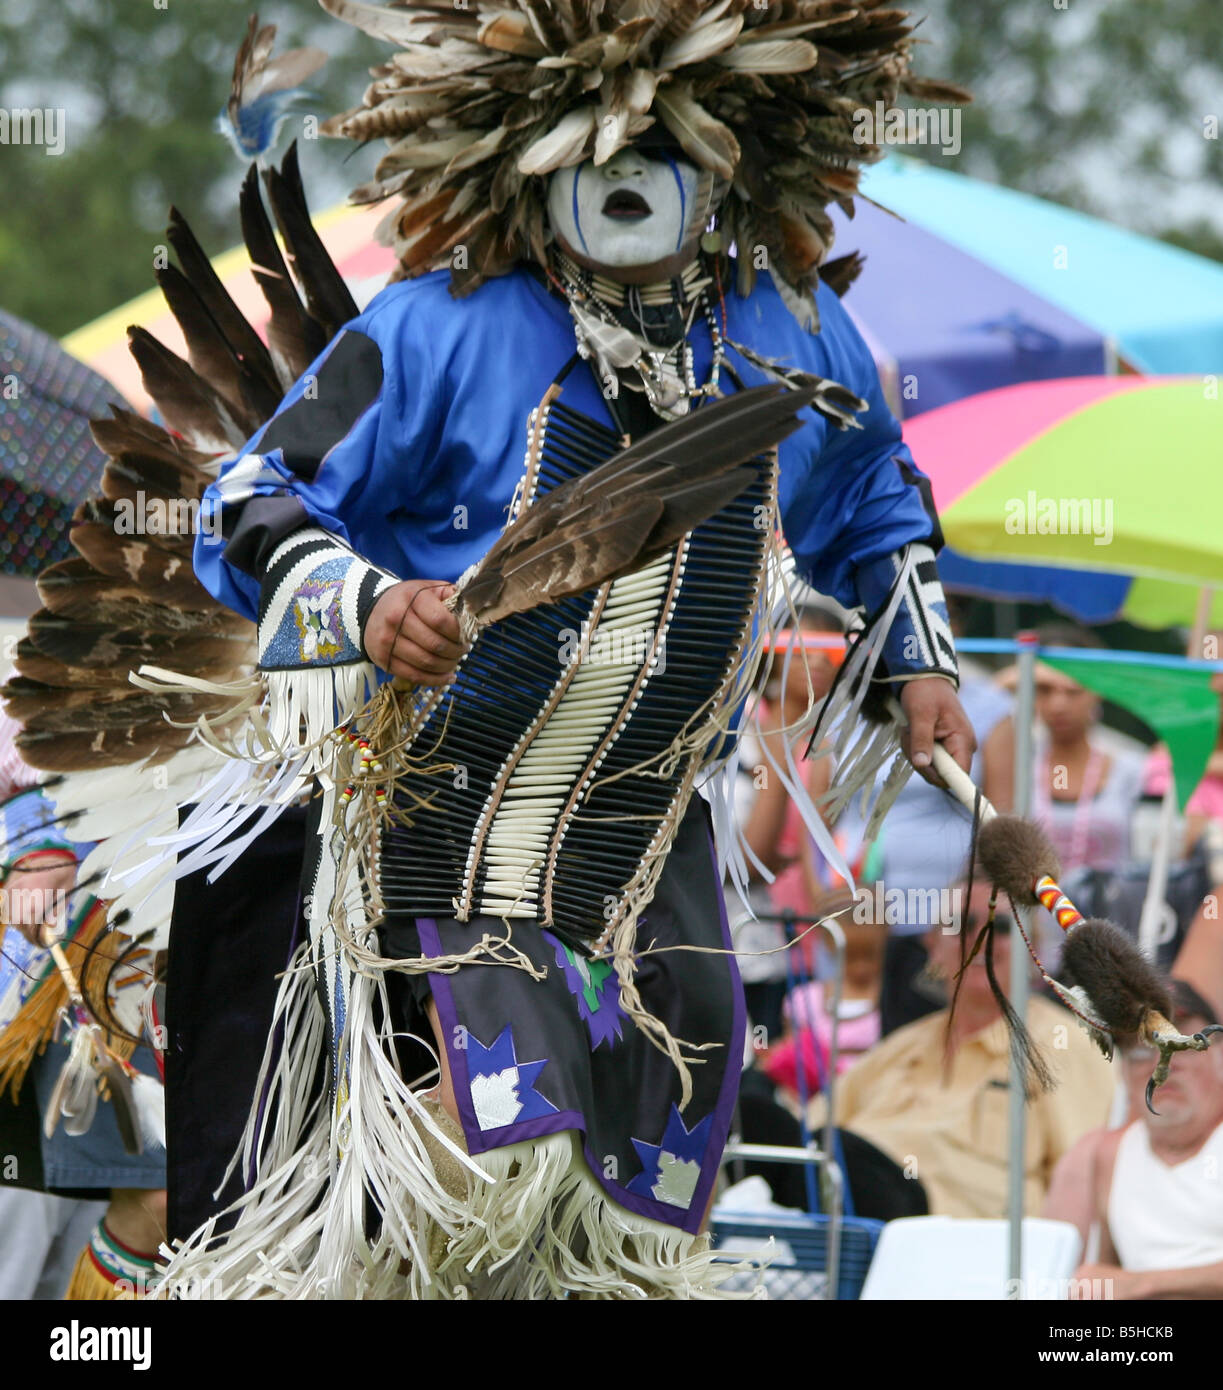 Eagle Tail, from the MicMac Tribe of Canada, dances at the 8th Annual Red Wing Native American PowWow in Virginia. Stock Photo